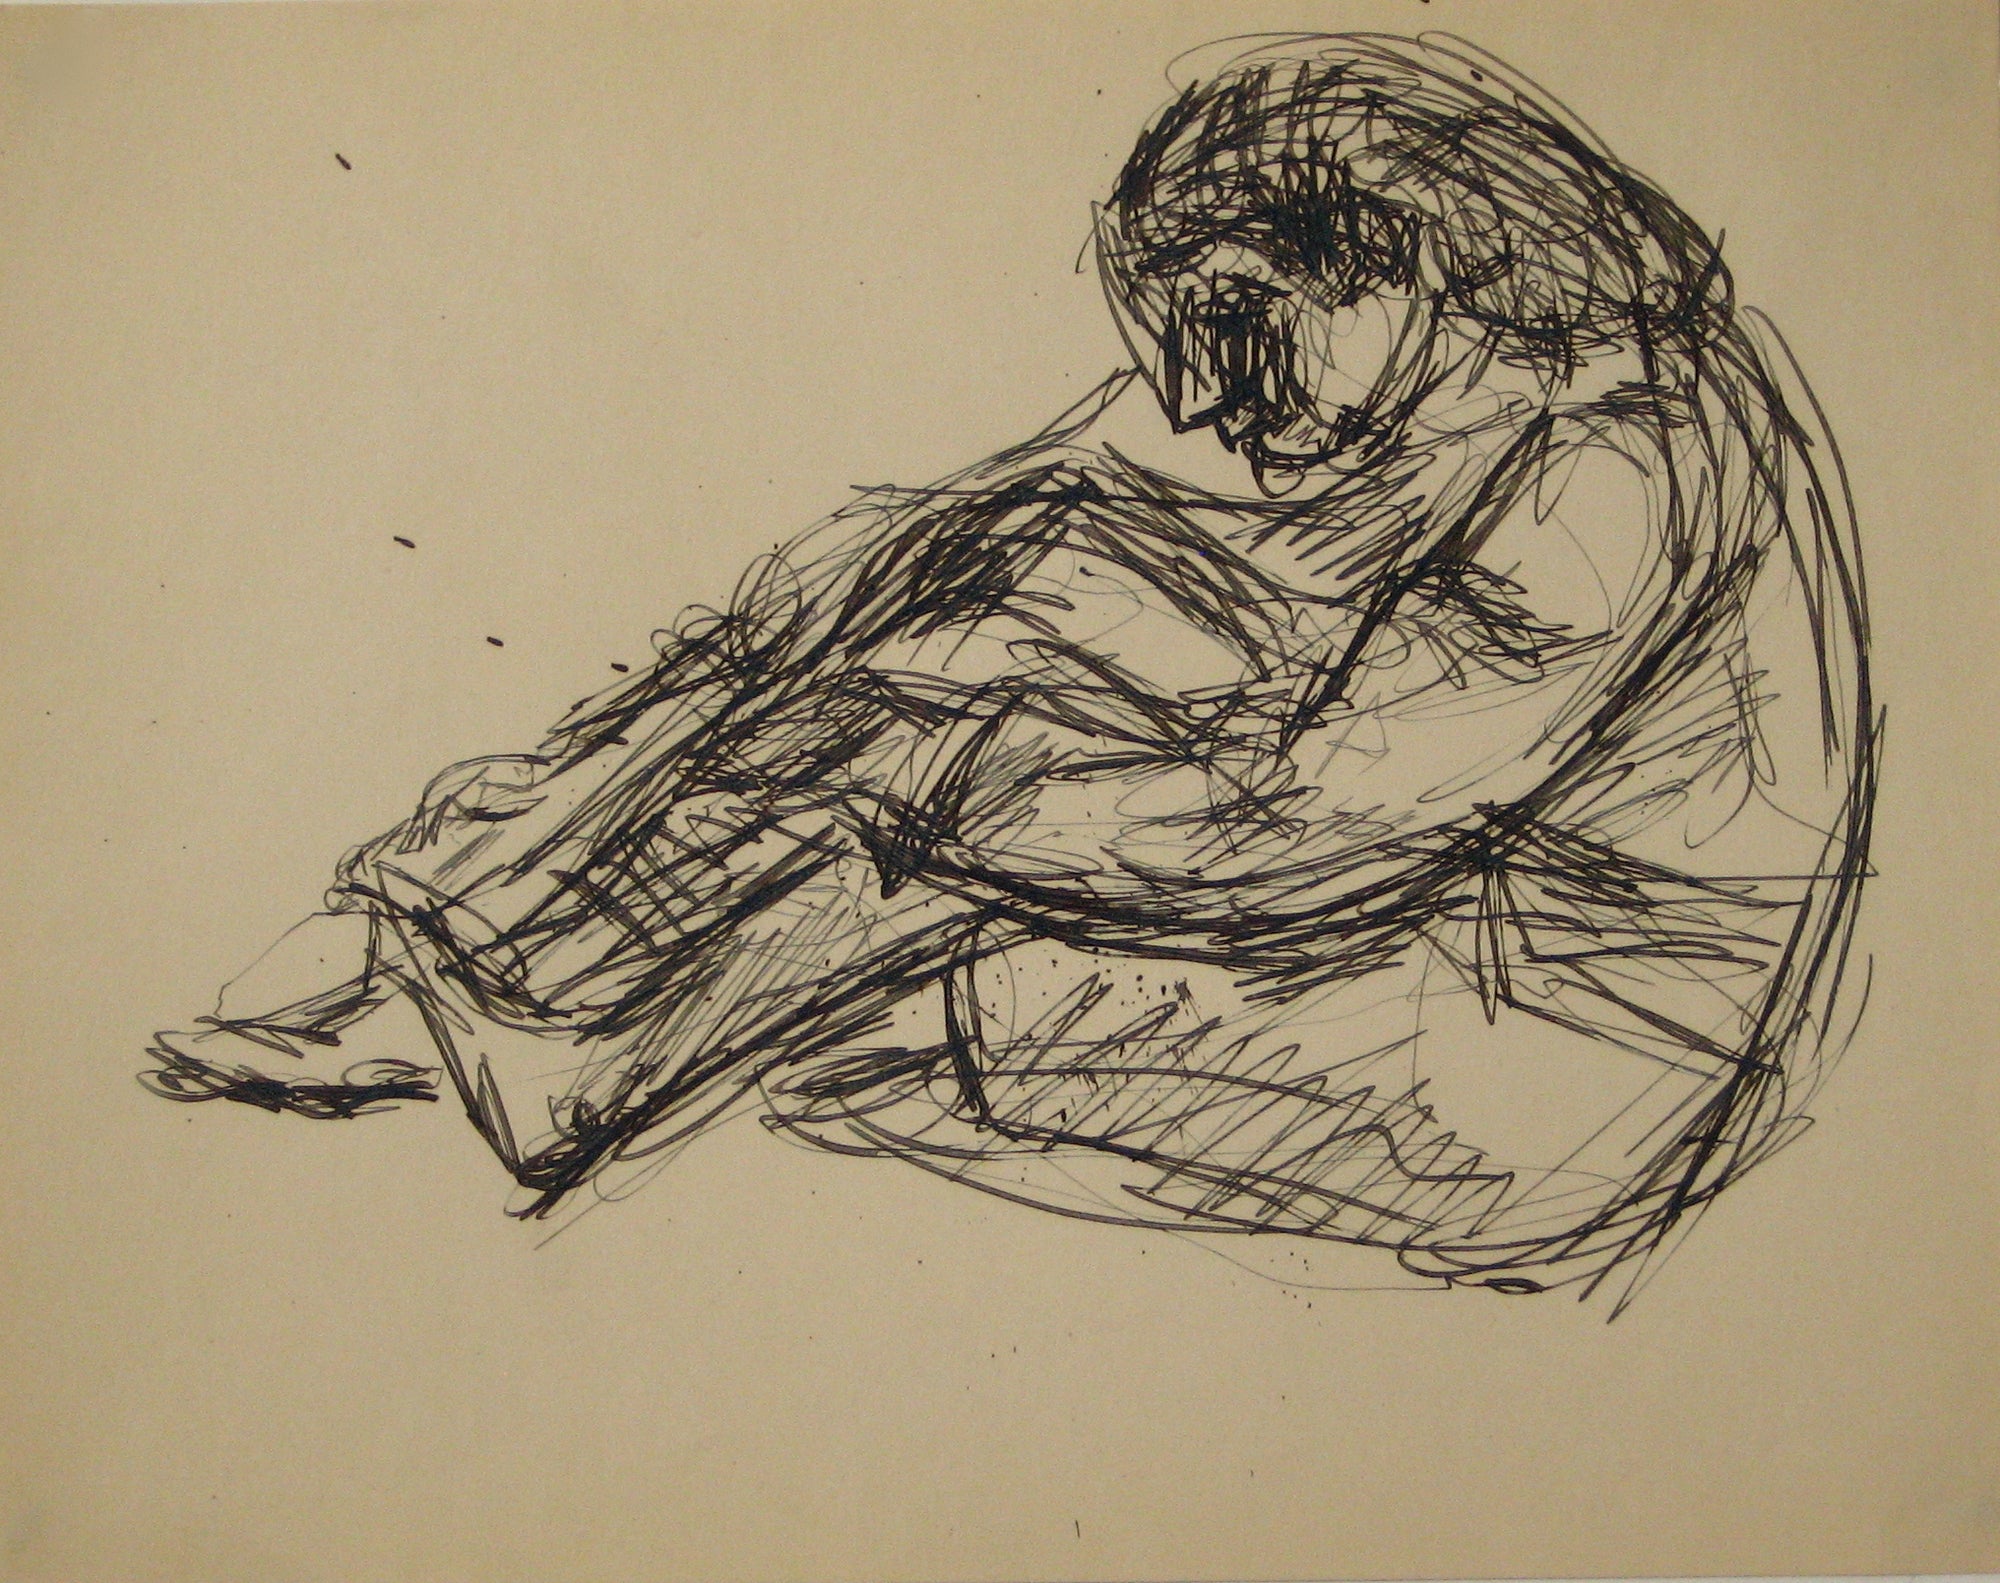 Seated Monochrome Figure Sketch <br>Early to Mid 20th Century Ink on Paper <br><br>#14289